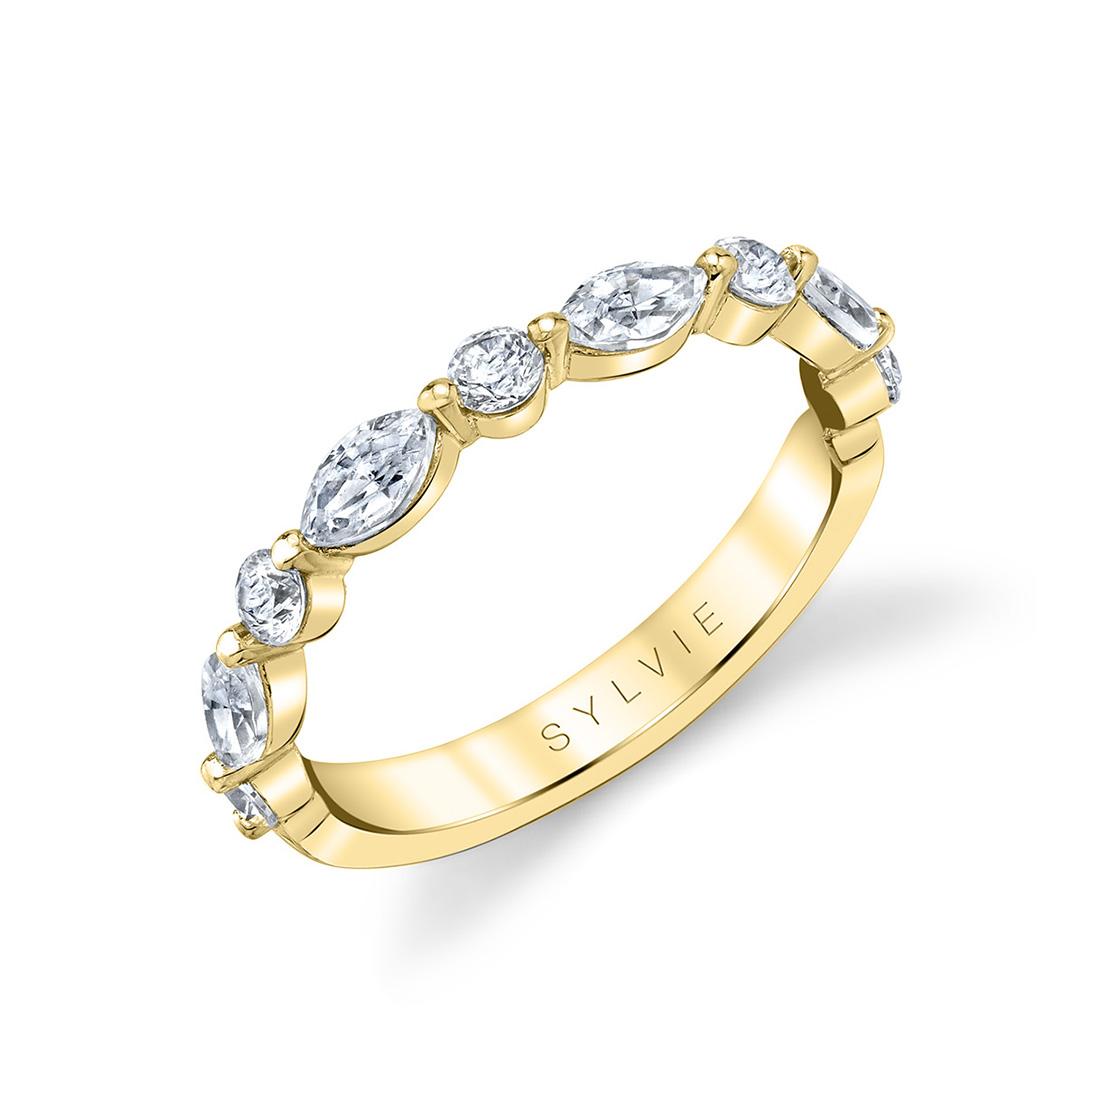 marquise wedding band with shared prongs in yellow gold